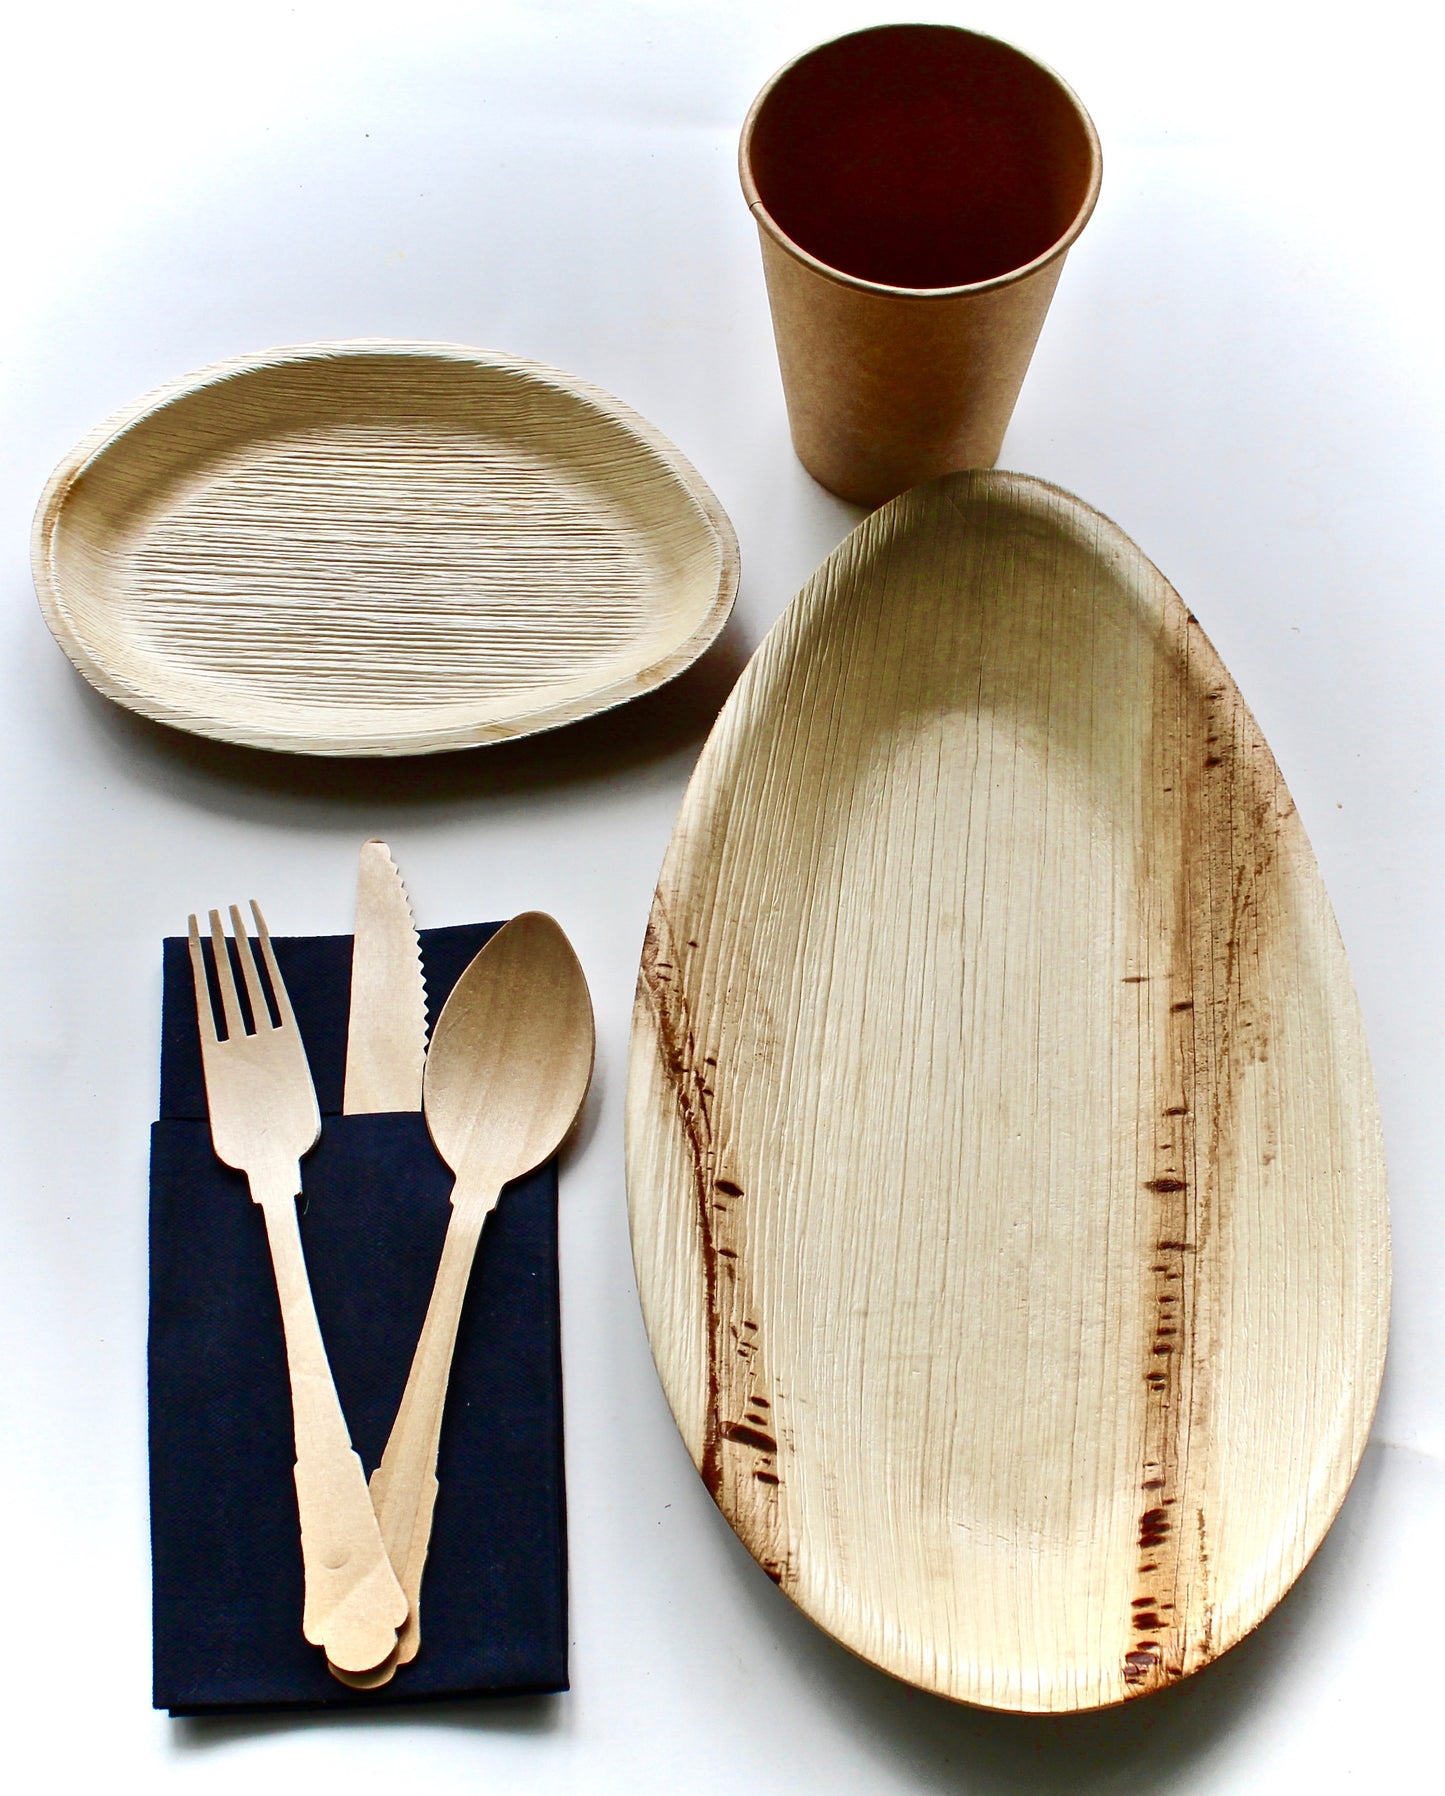 Palm Leaf plates 10 Pice 6x4" Try angle - 10 pic 6" Heart  - 10 pic Coup  - 30 Pic cutlery  - 20 pic napkin